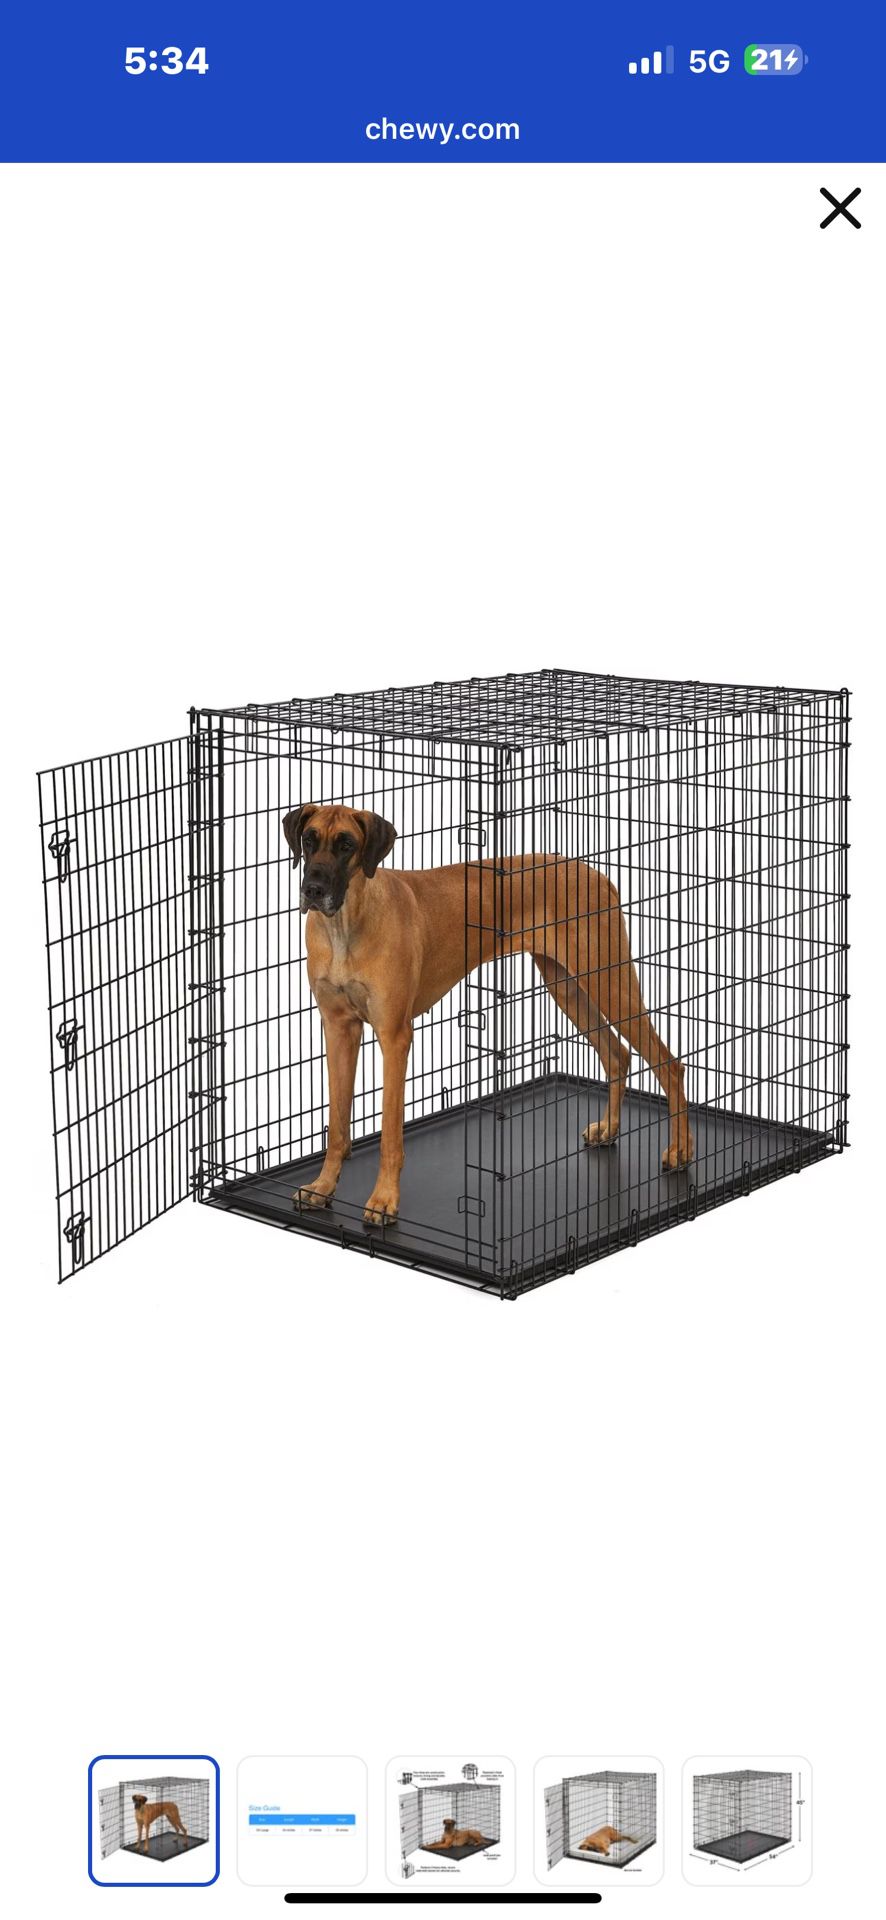 Brand New Xxl Large Dog Or Animal Crate